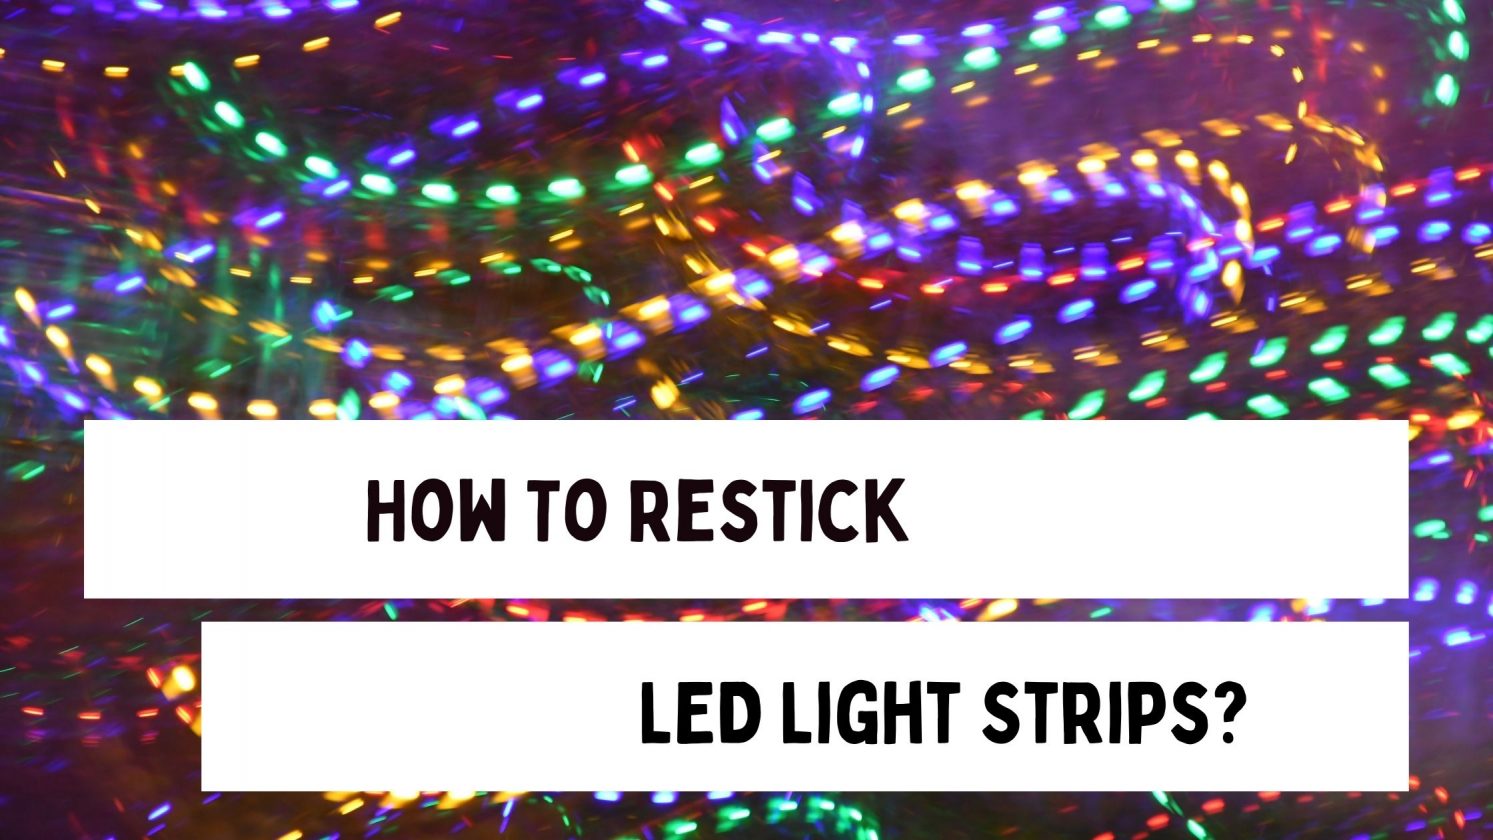 How To Restick Led Lights